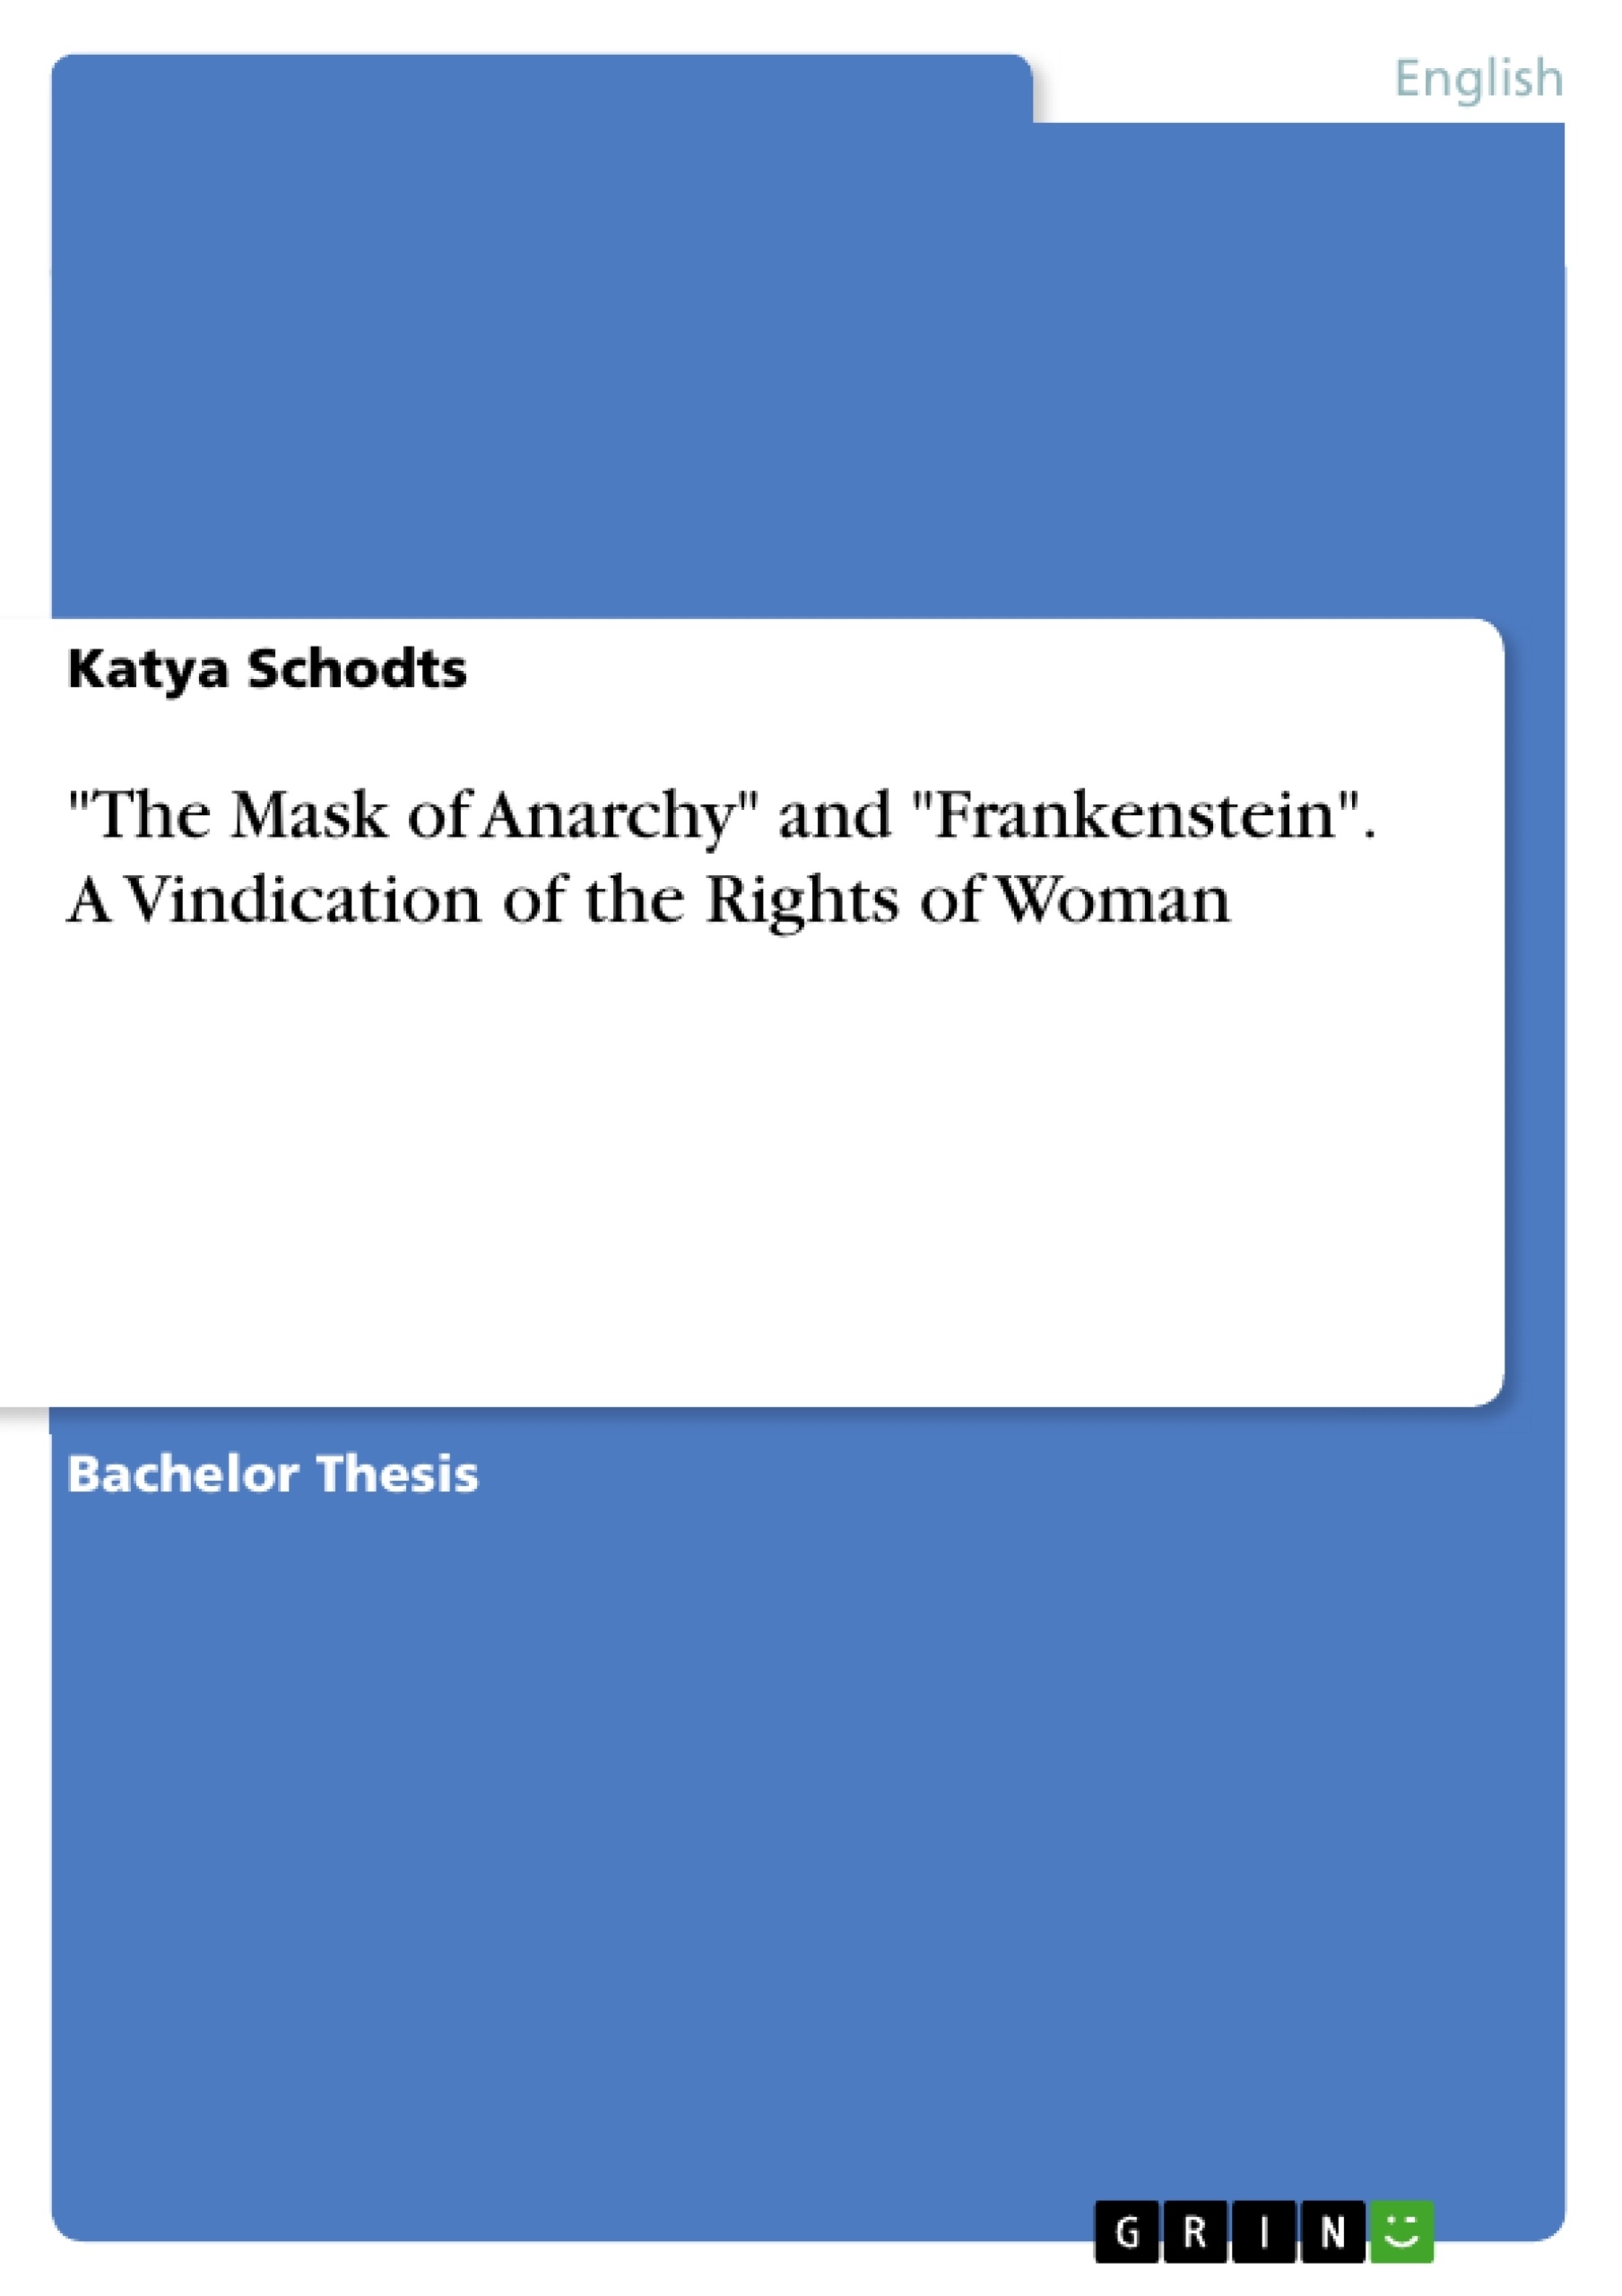 Título: "The Mask of Anarchy" and "Frankenstein". A Vindication of the Rights of Woman